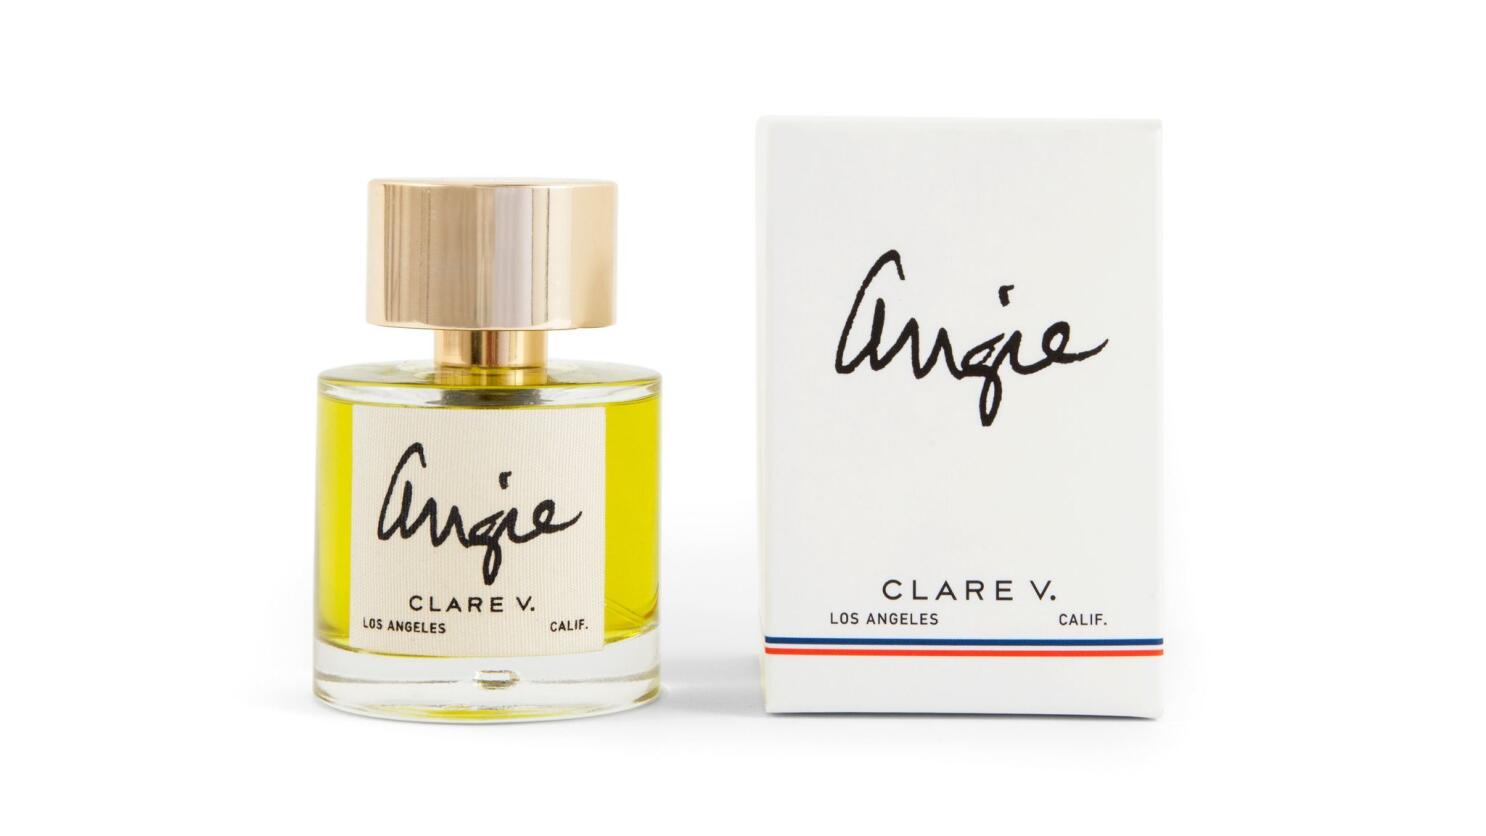 Designer Clare Vivier Discusses Beauty Essentials and Her First Fragrance  for Clare V.